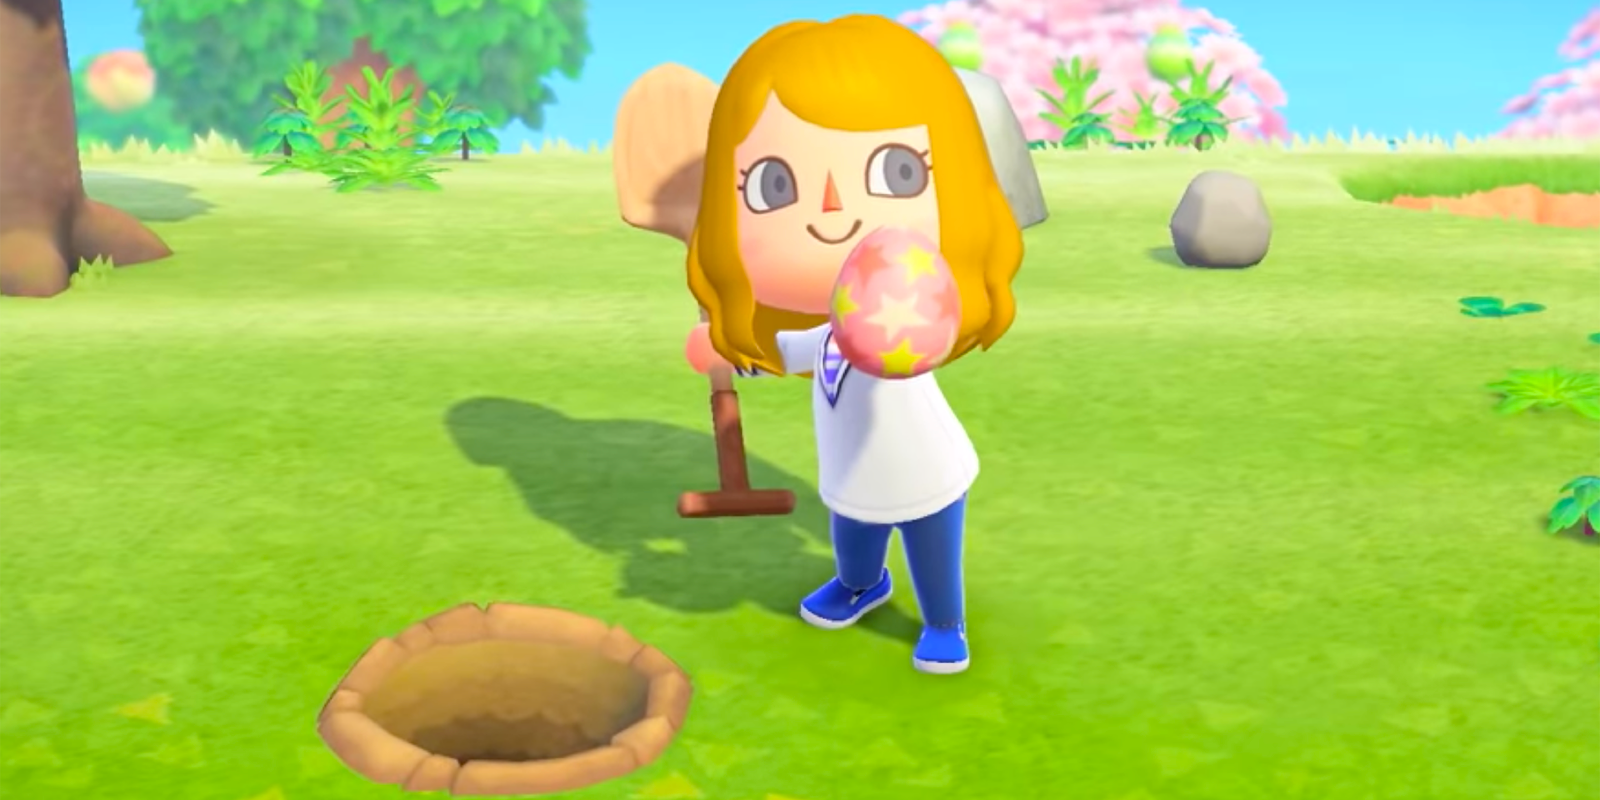 A player digs up an Earth Egg in Animal Crossing: New Horizons